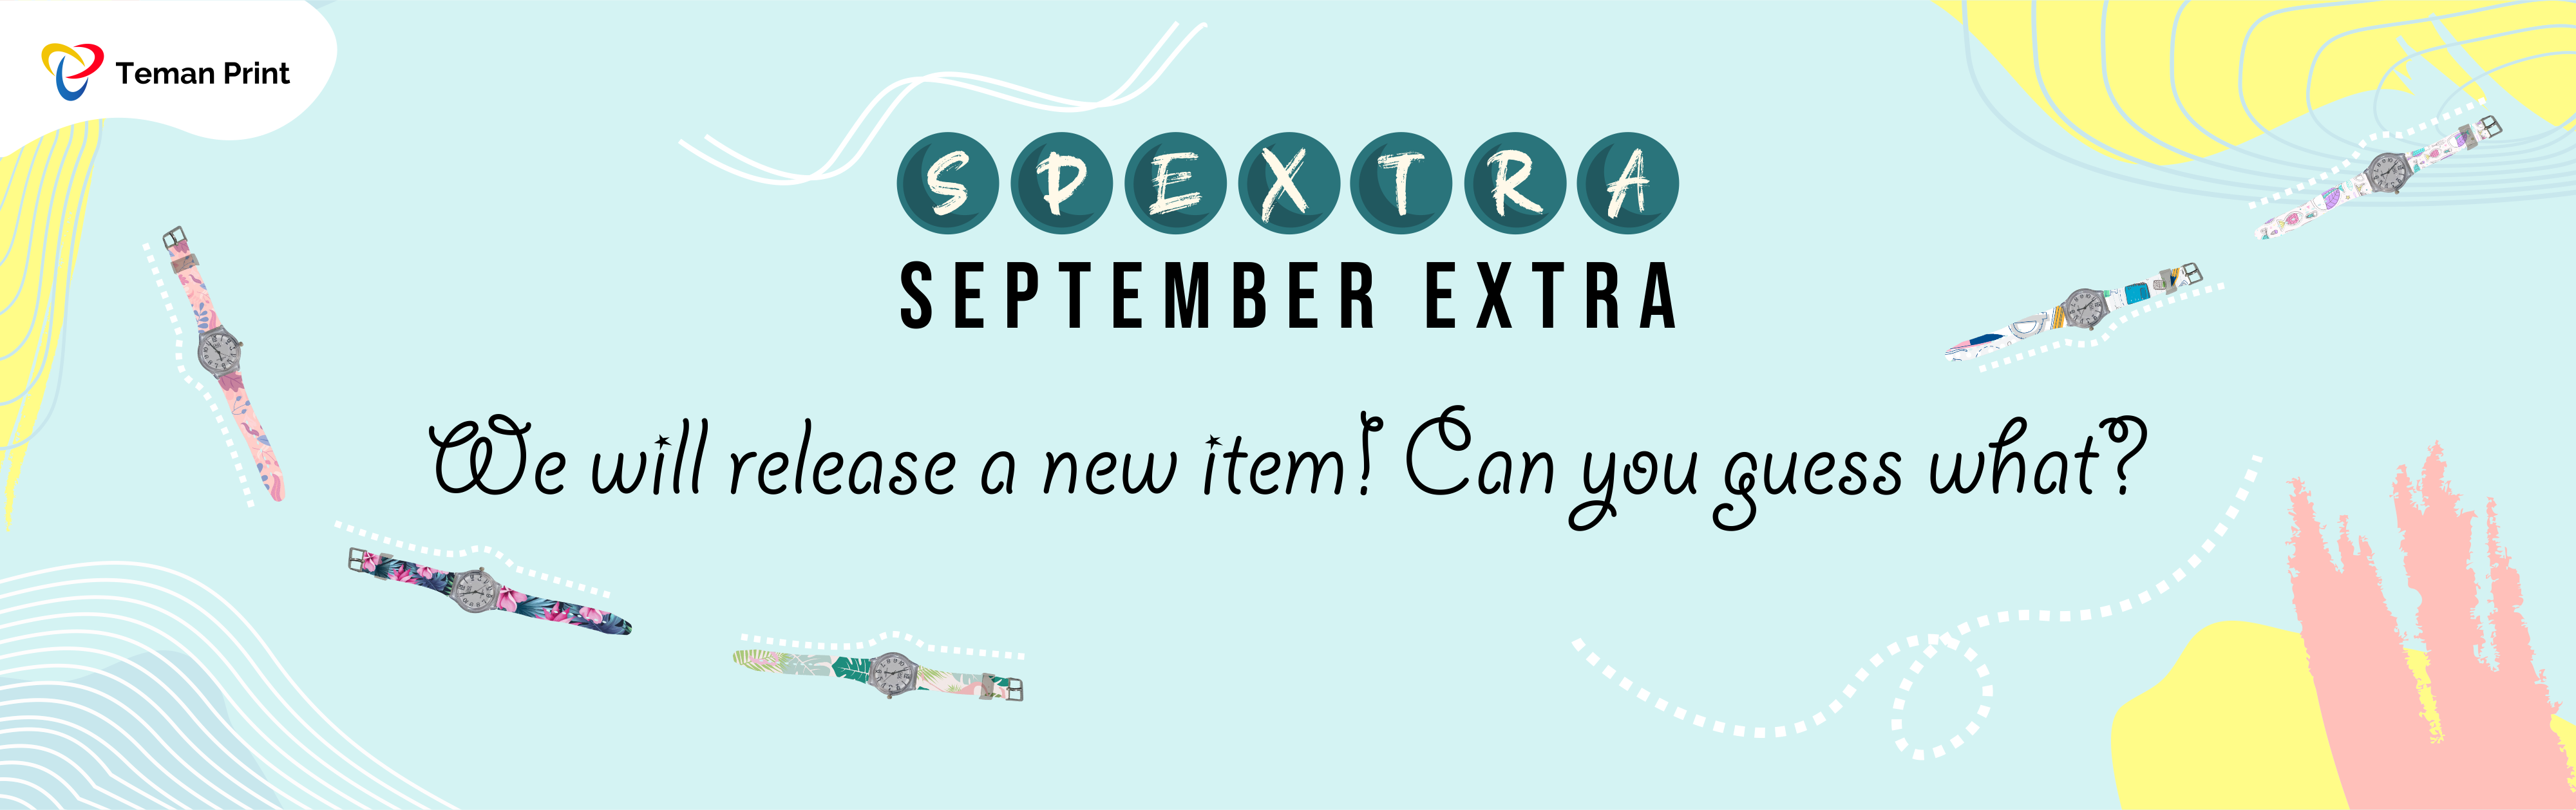 Spextra : We Will Release a New Item